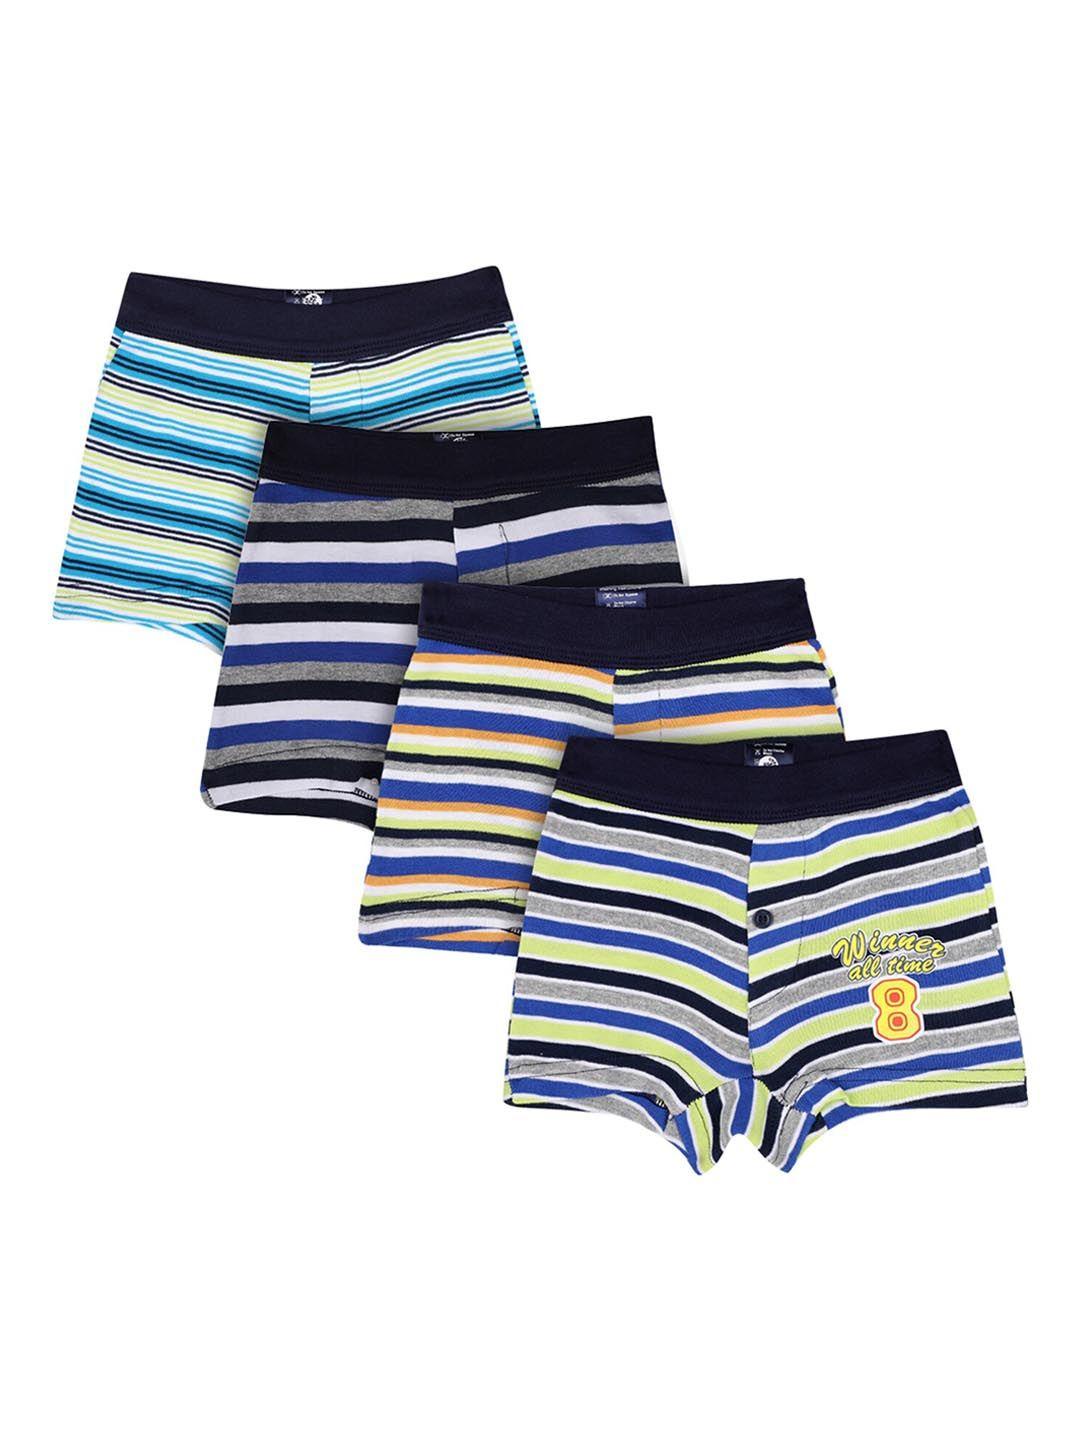 bodycare kids boys pack of 4 assorted blue striped cotton trunks